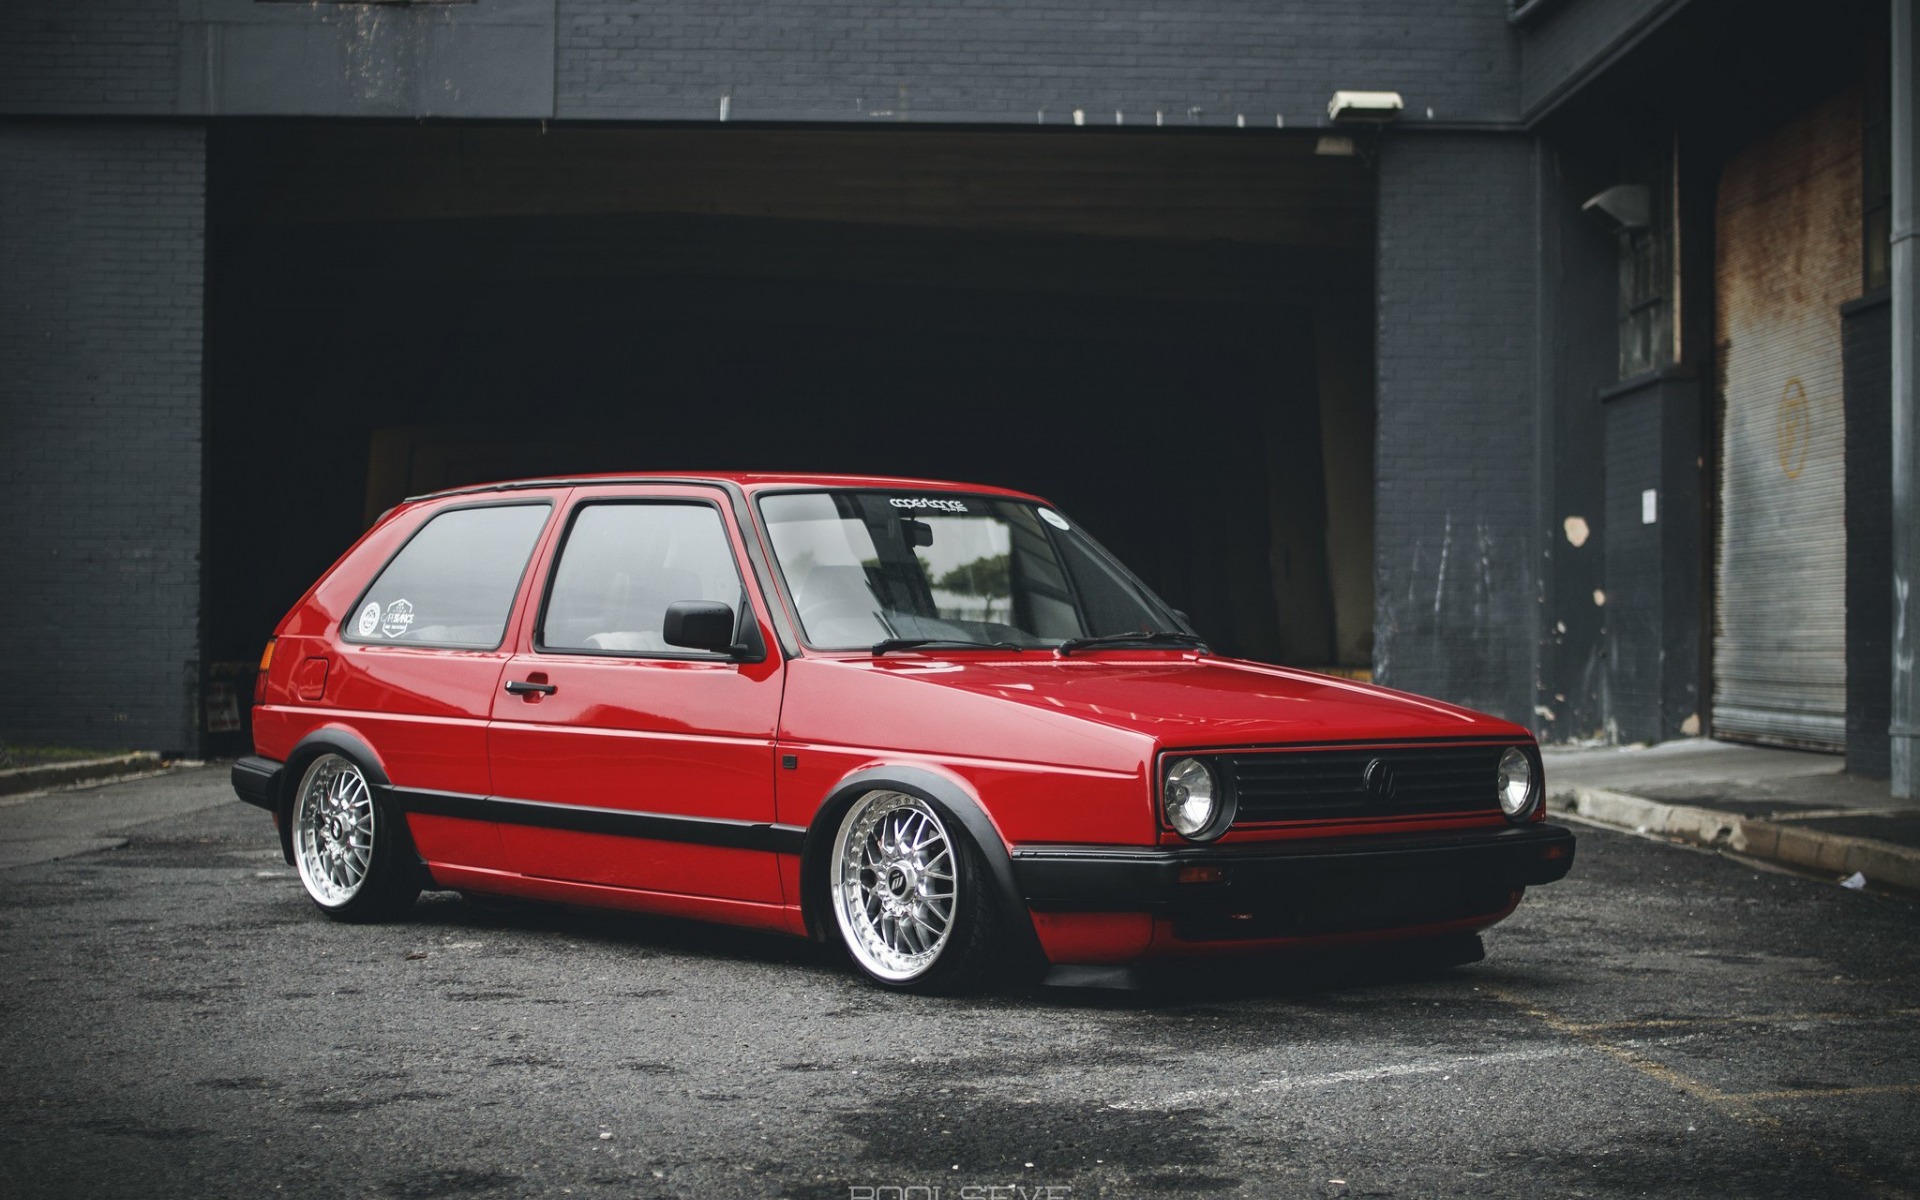 Download wallpapers volkswagen golf tuning mk stance german cars red golf vw volkswagen for desktop with resolution x high quality hd pictures wallpapers